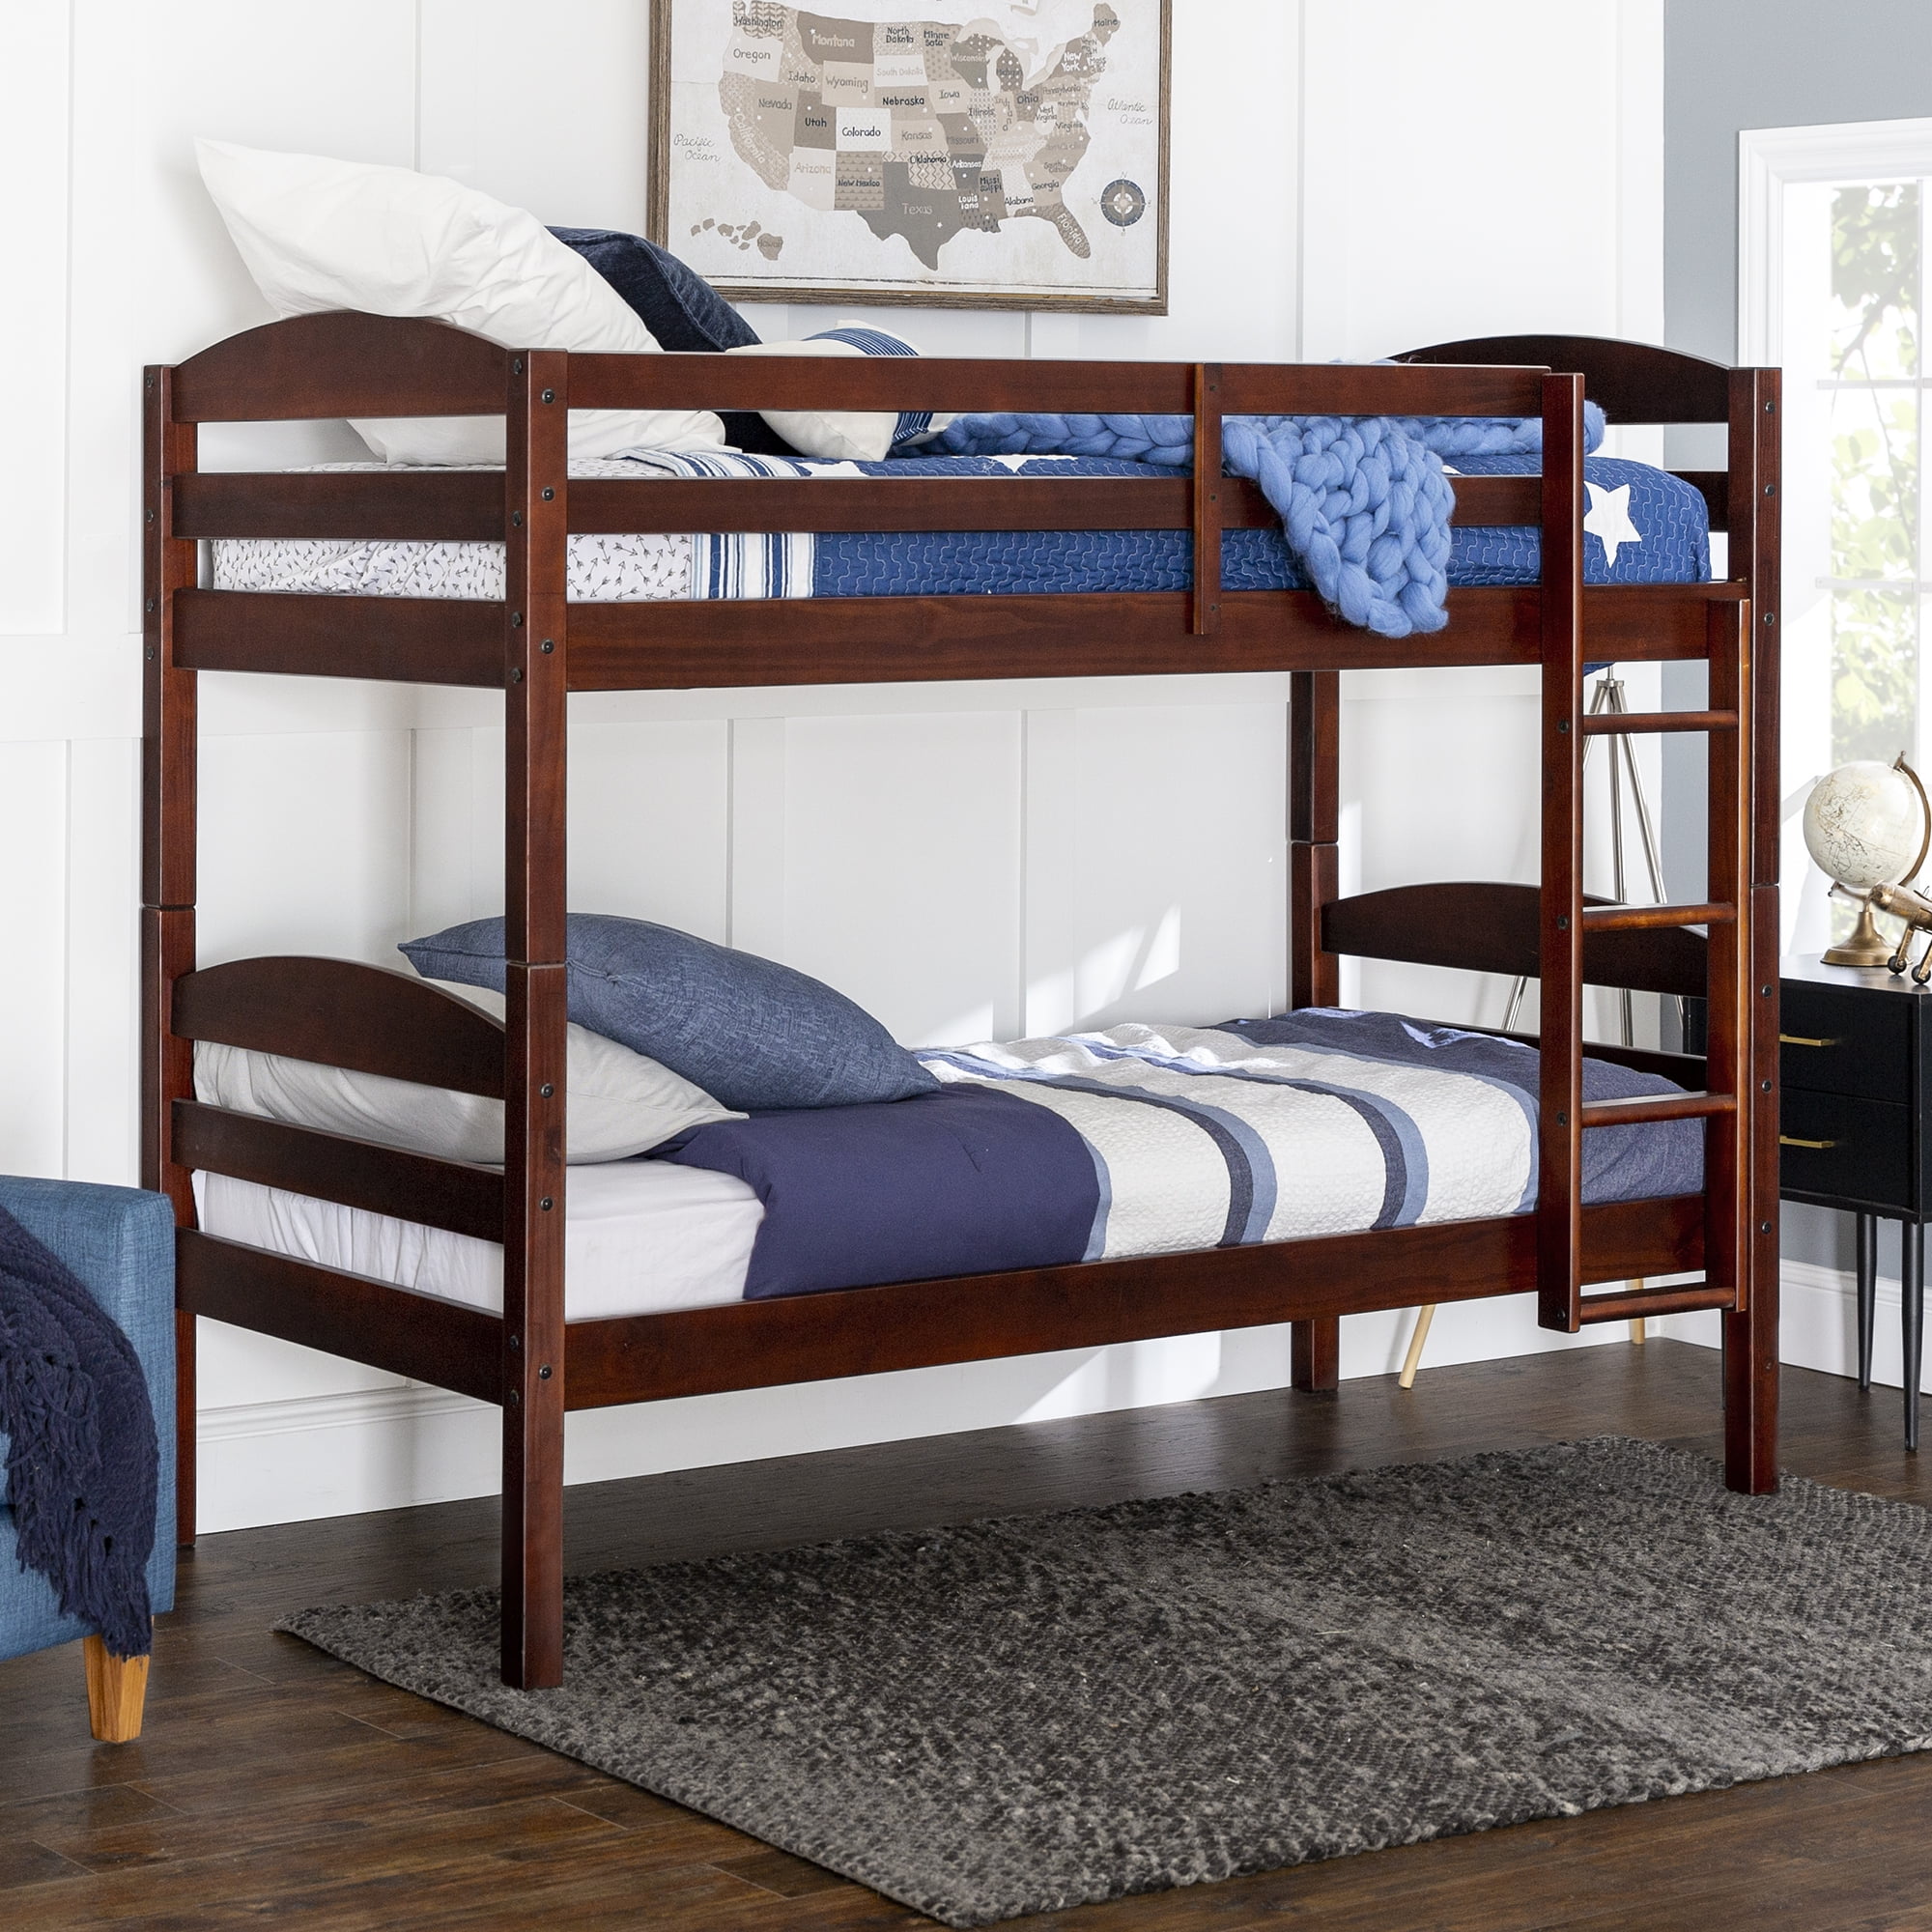 Walker Edison Solid Wood Twin Over, Wooden Bunk Beds That Separate